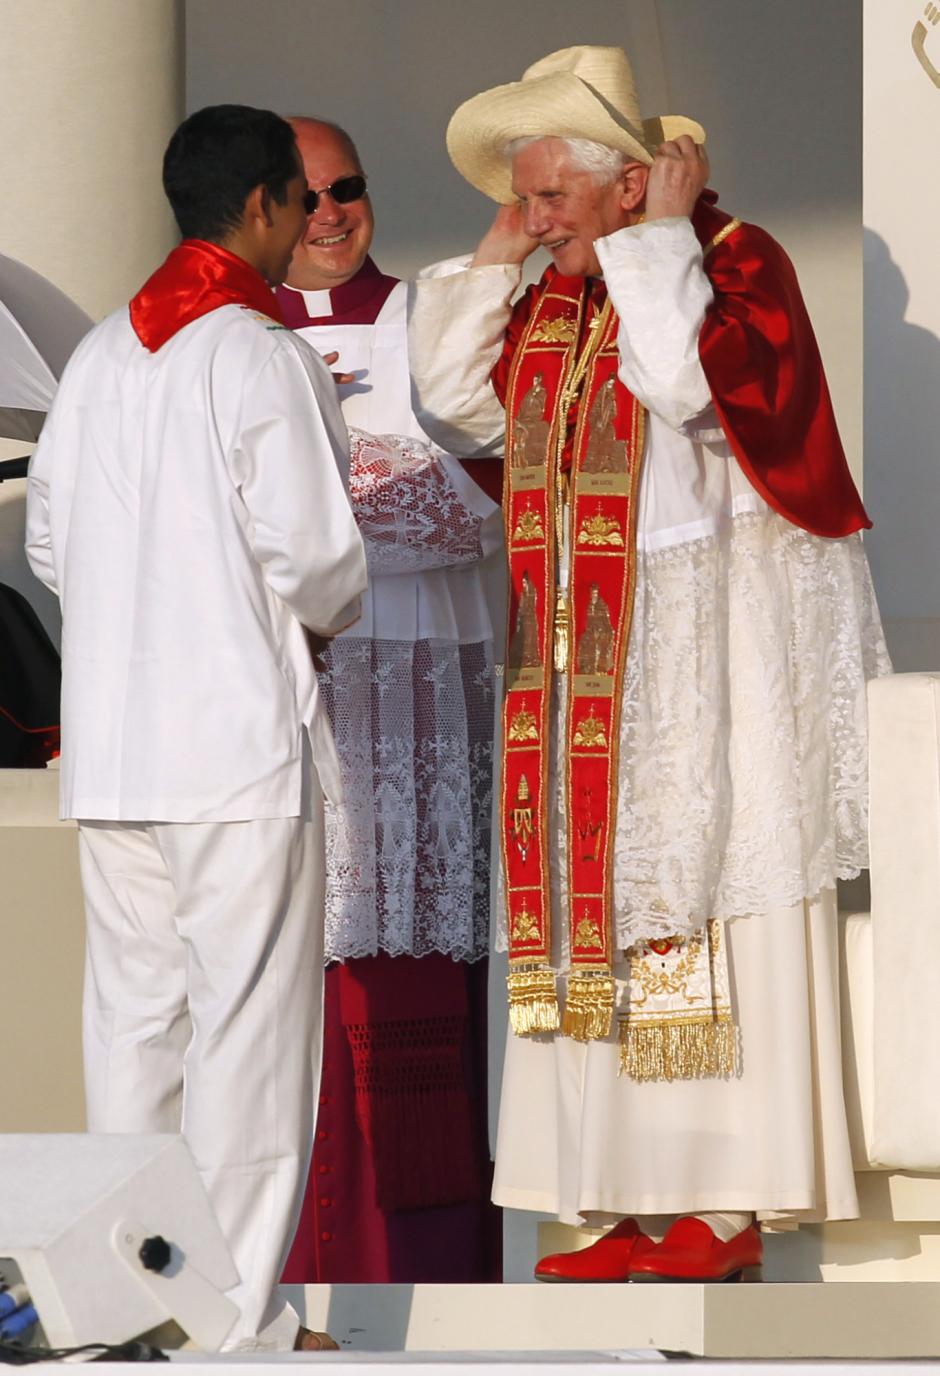 Pope Benedict XVI puts on a hat presented to him by a young man representing the youth from Latin America in Madrid' Thursday Aug. 18, 2011. The Pontiff leaves Madrid on the occasion of the Catholic Church's World Youth Day.